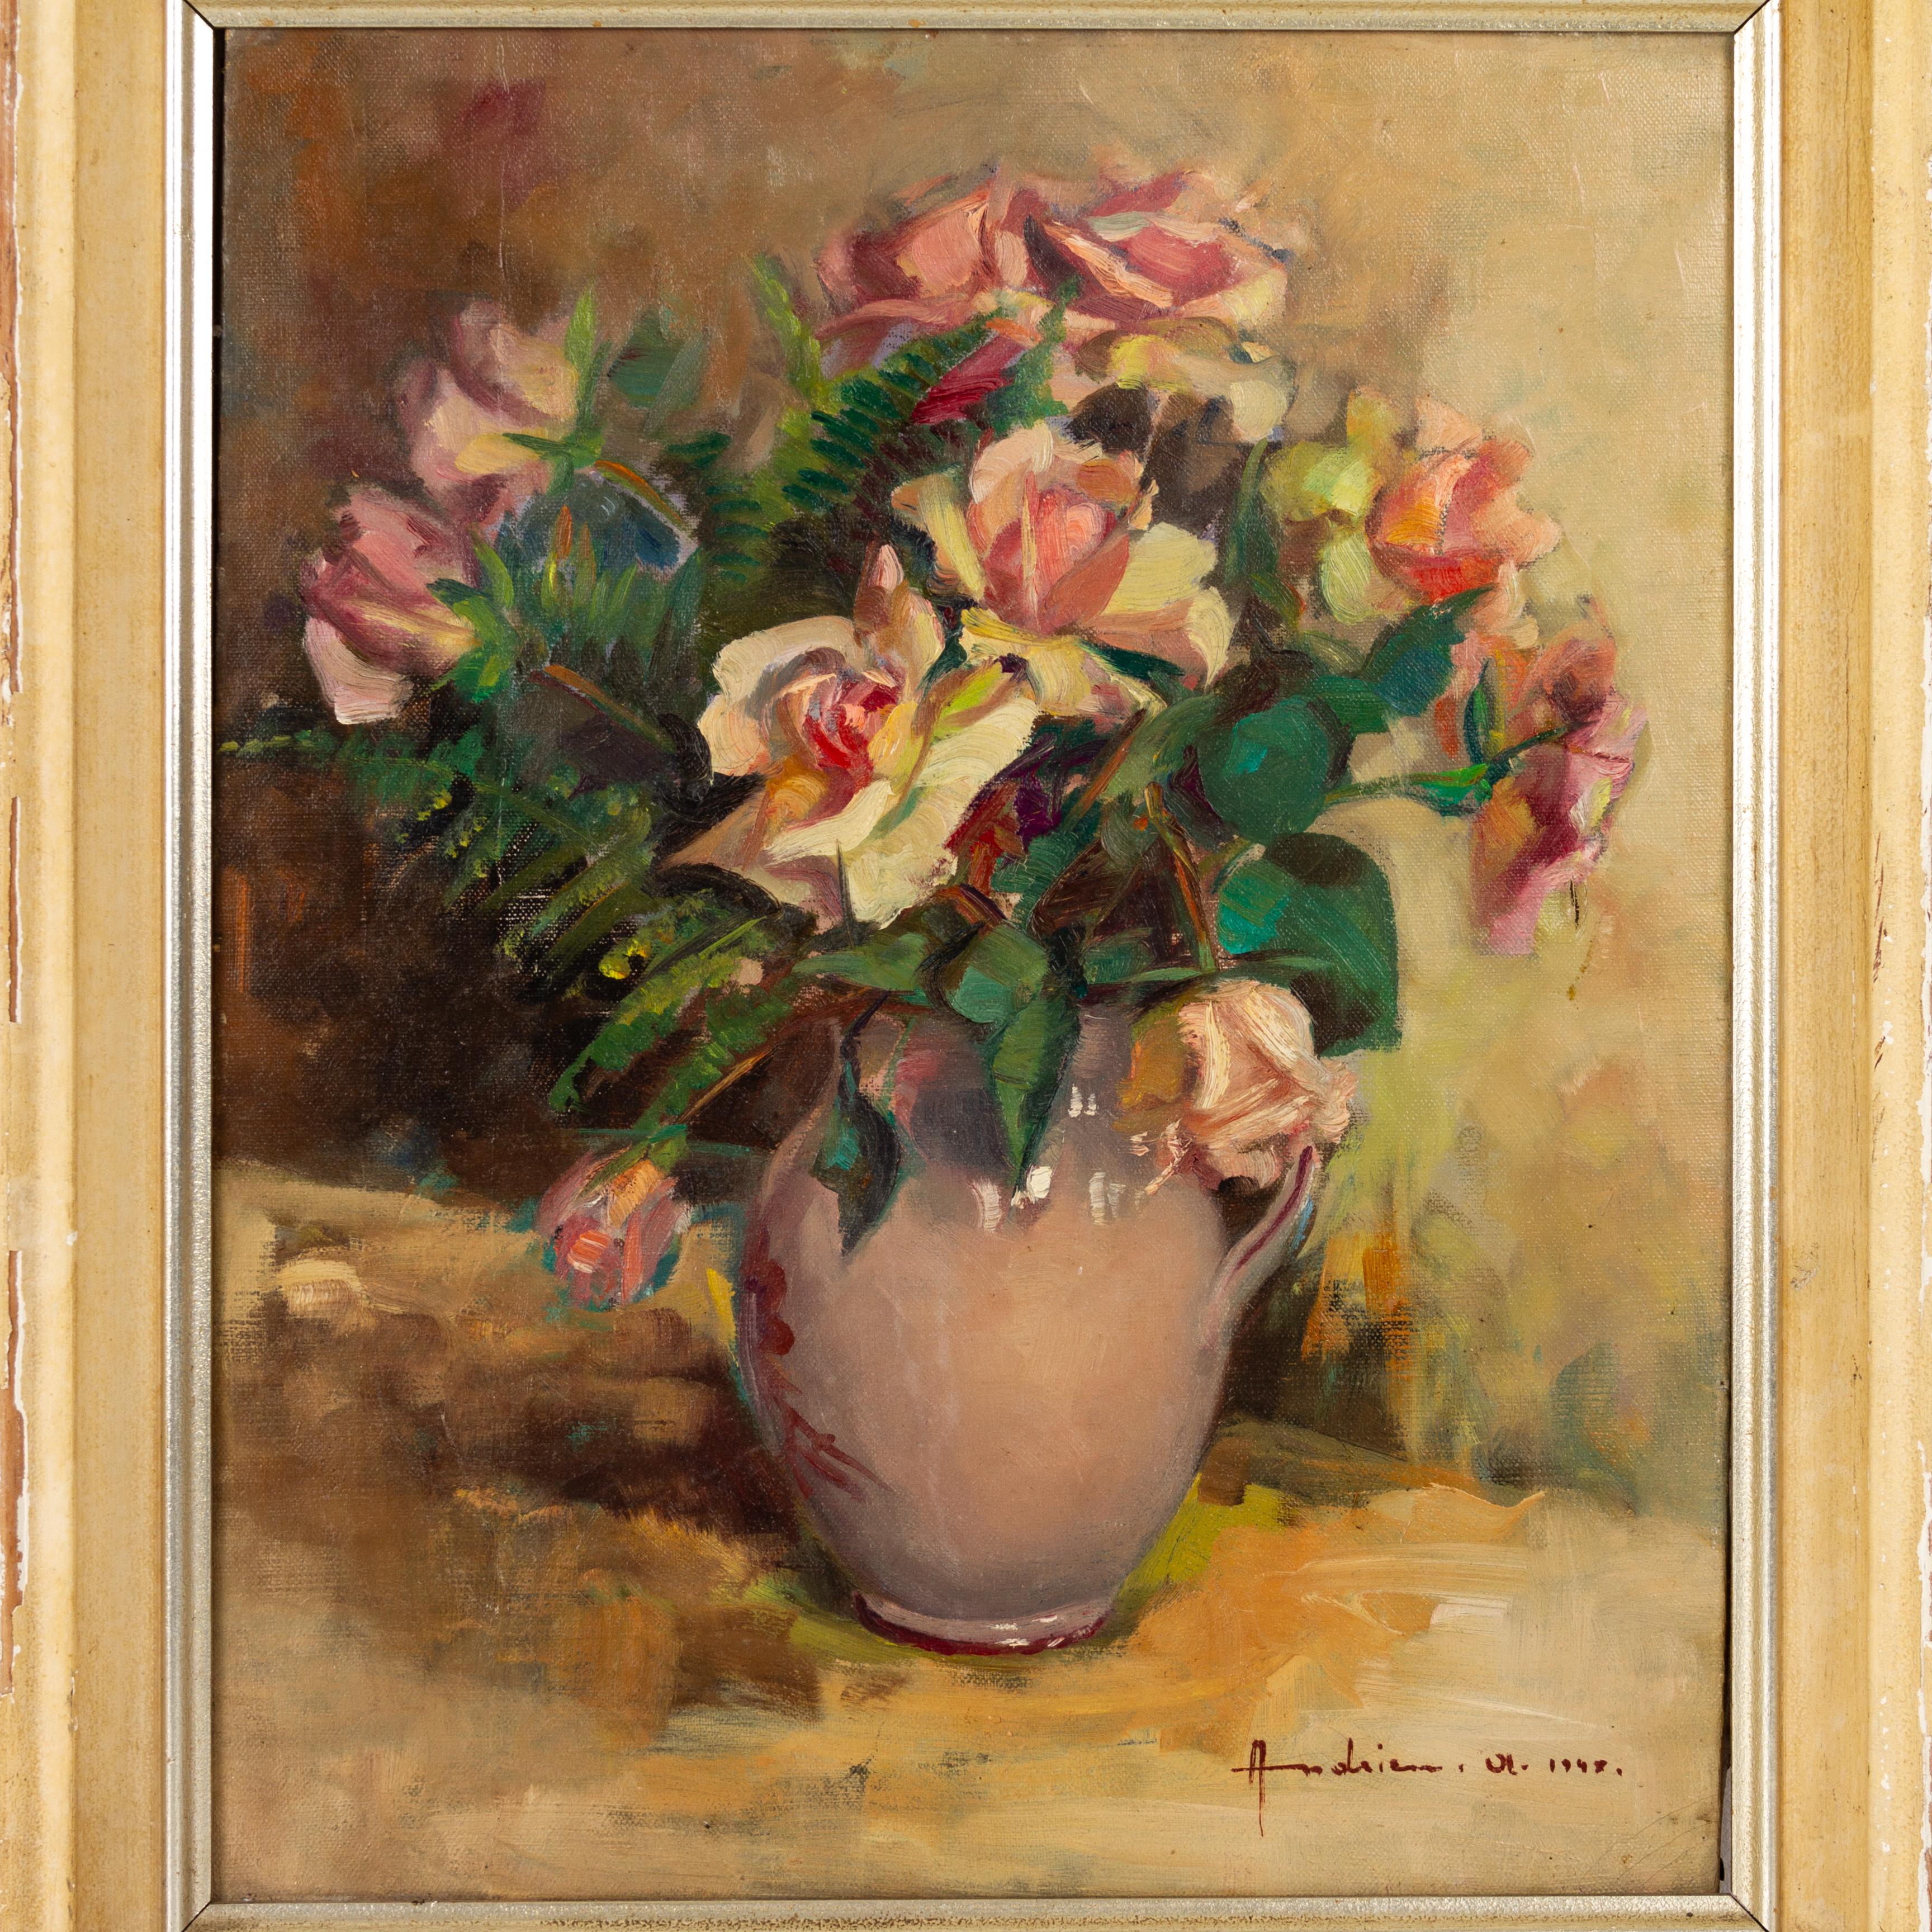 In good condition
From a private collection
Free international shipping
Belgian Still Life Flowers Signed Oil Painting Mid 20th Century
